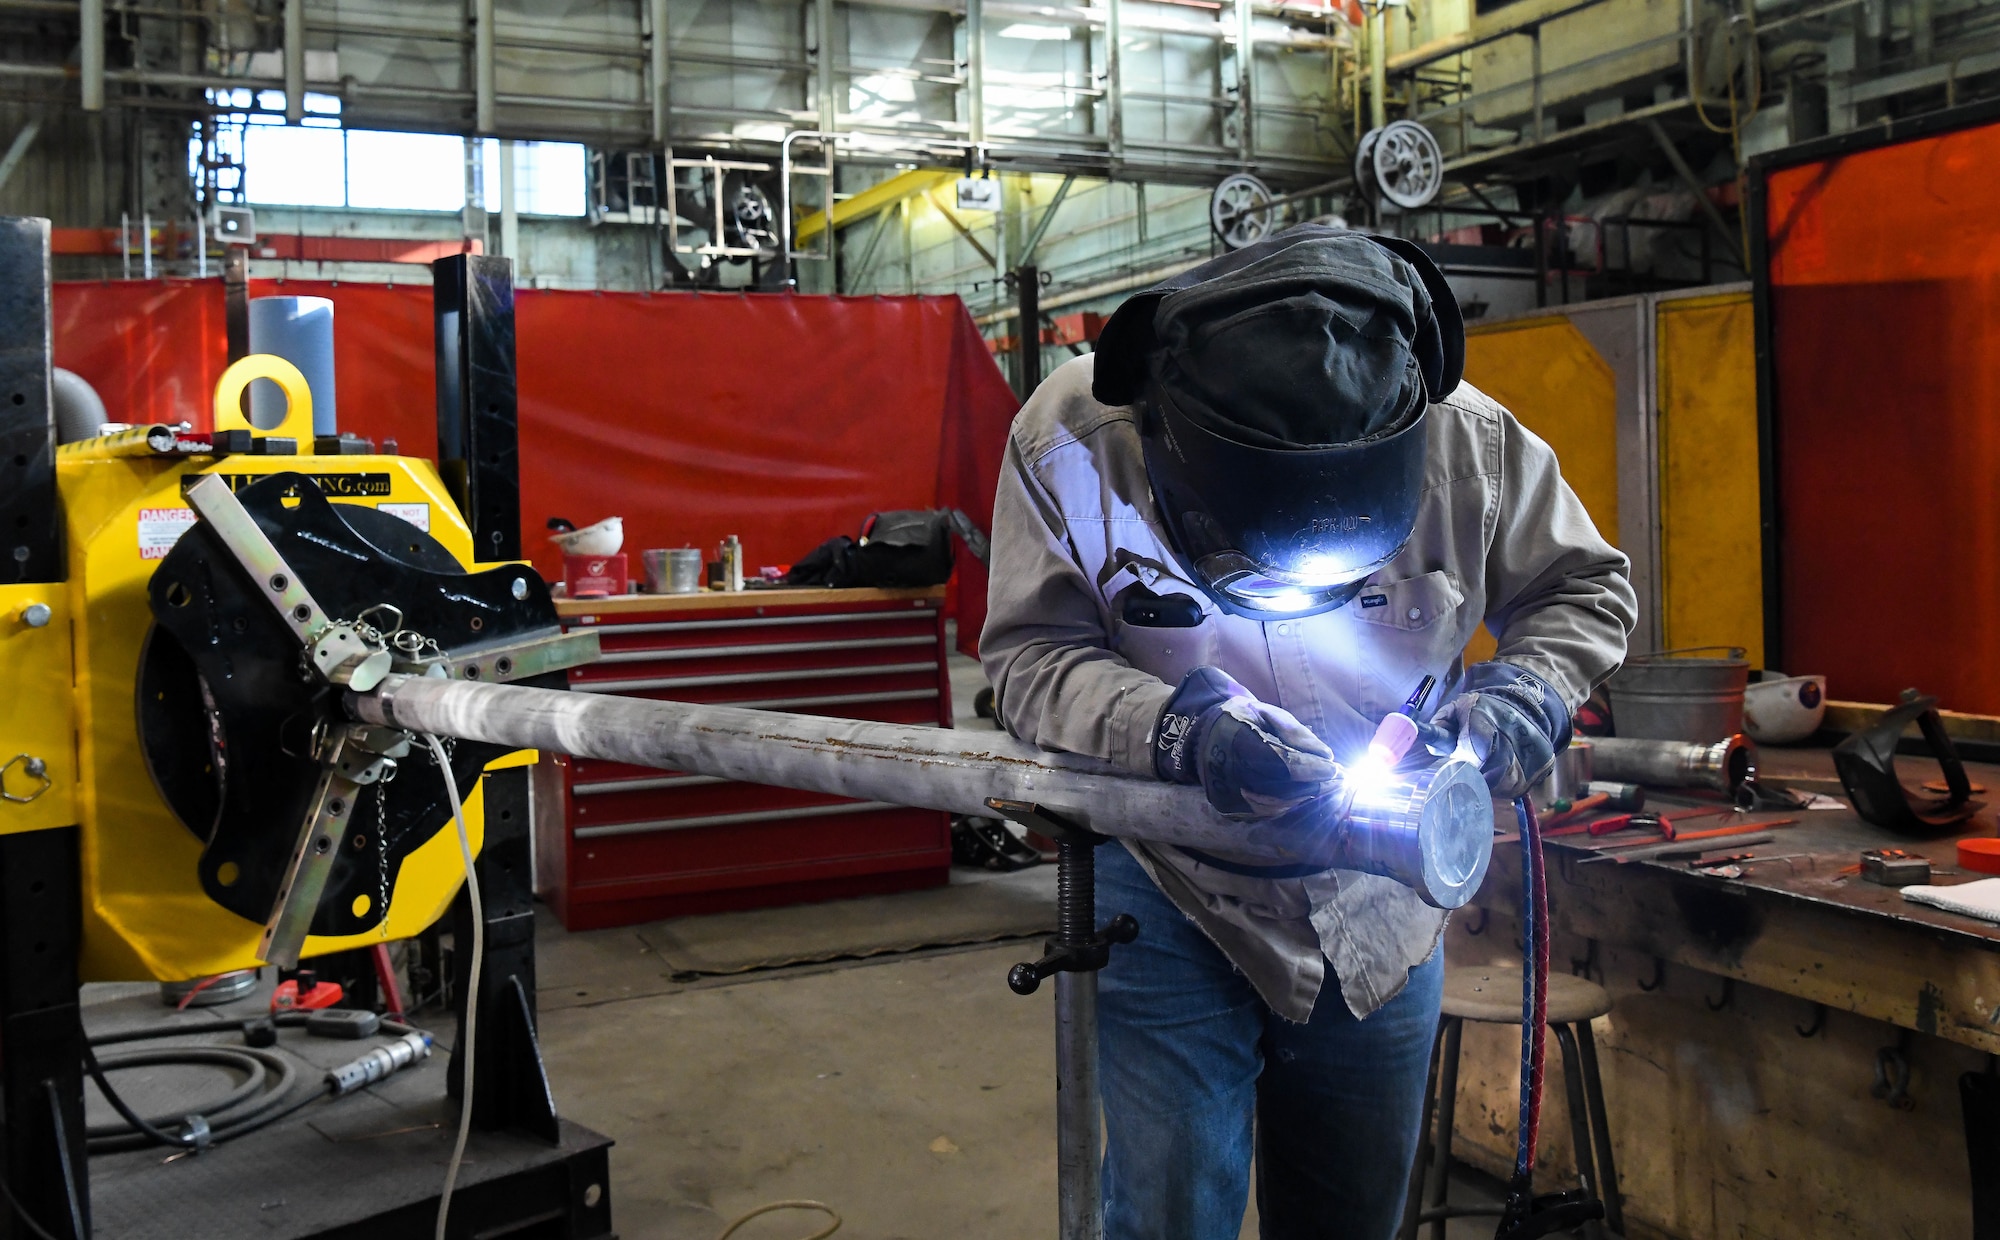 Pipefitter Billy Joe Emberton places tack welds before completely welding a flange onto a section of pipe, March 4, 2021, at the Model Shop at Arnold Air Force Base, Tenn. April is National Welding Month. (U.S. Air Force photo by Jill Pickett)